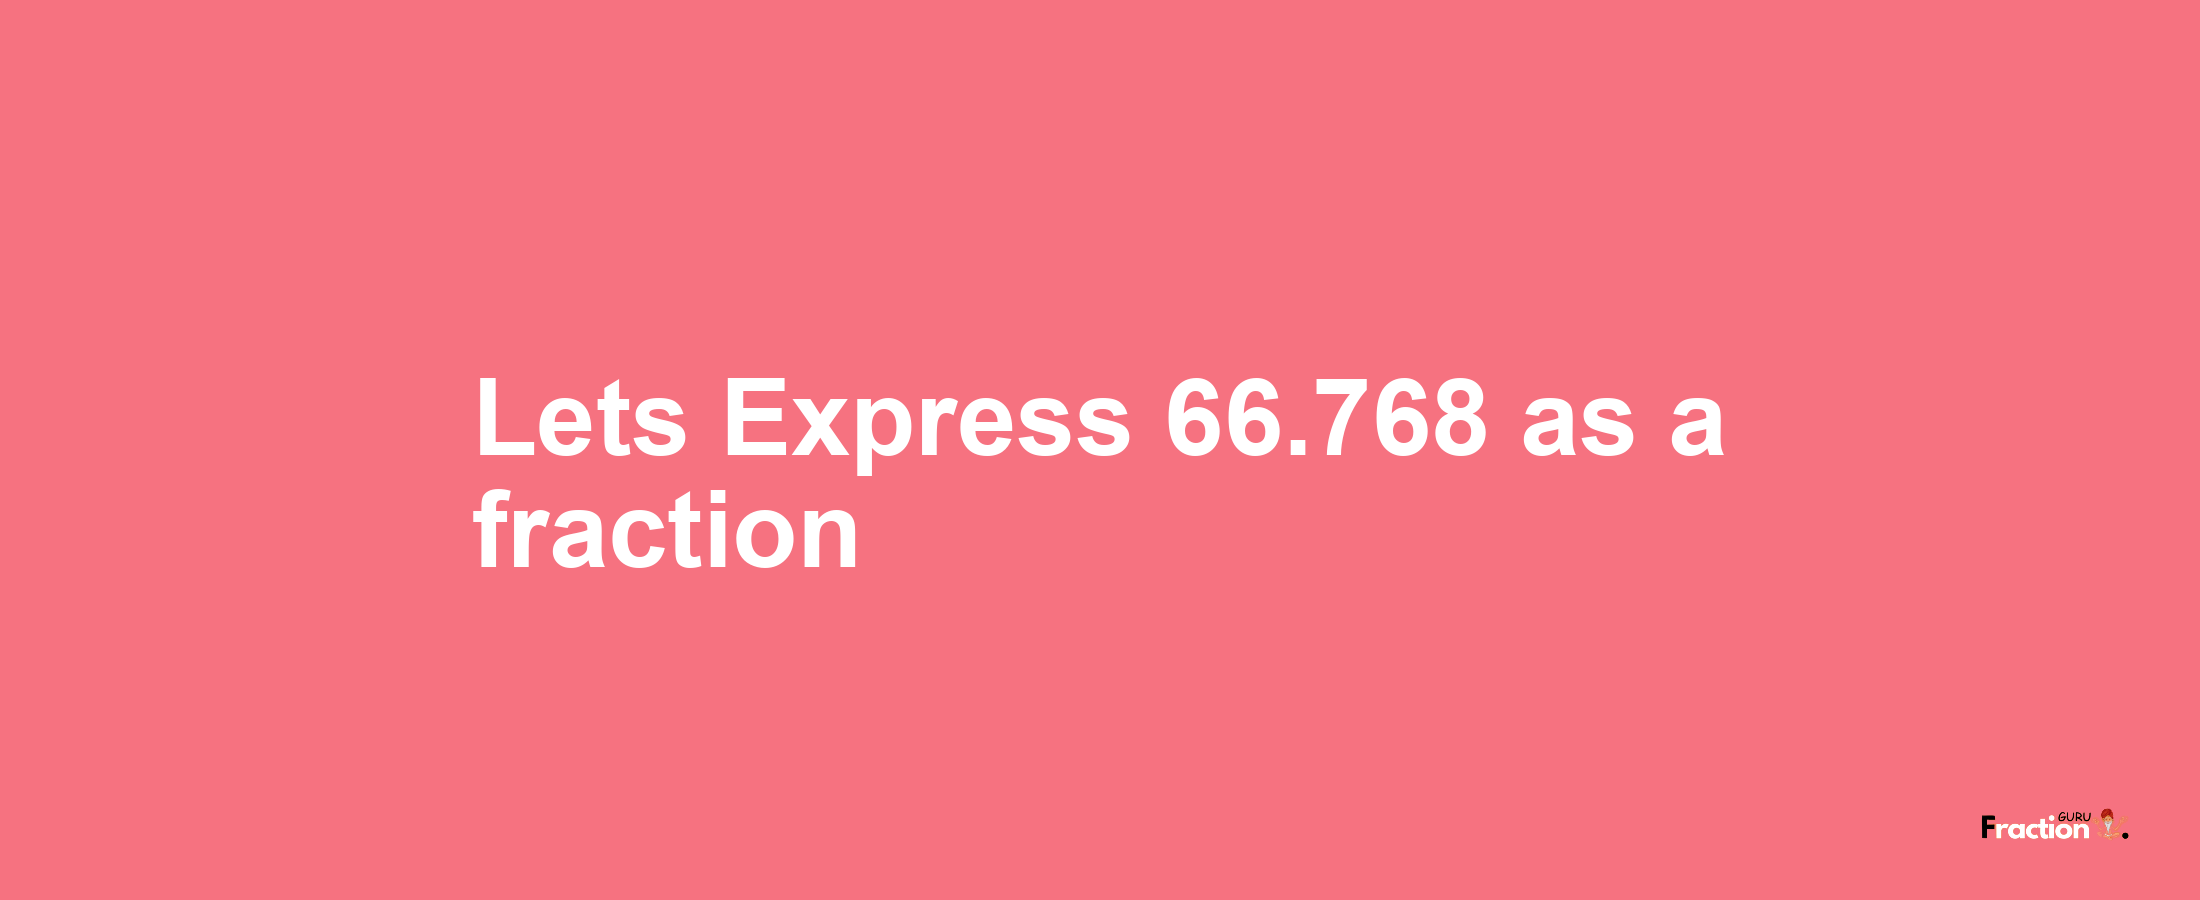 Lets Express 66.768 as afraction